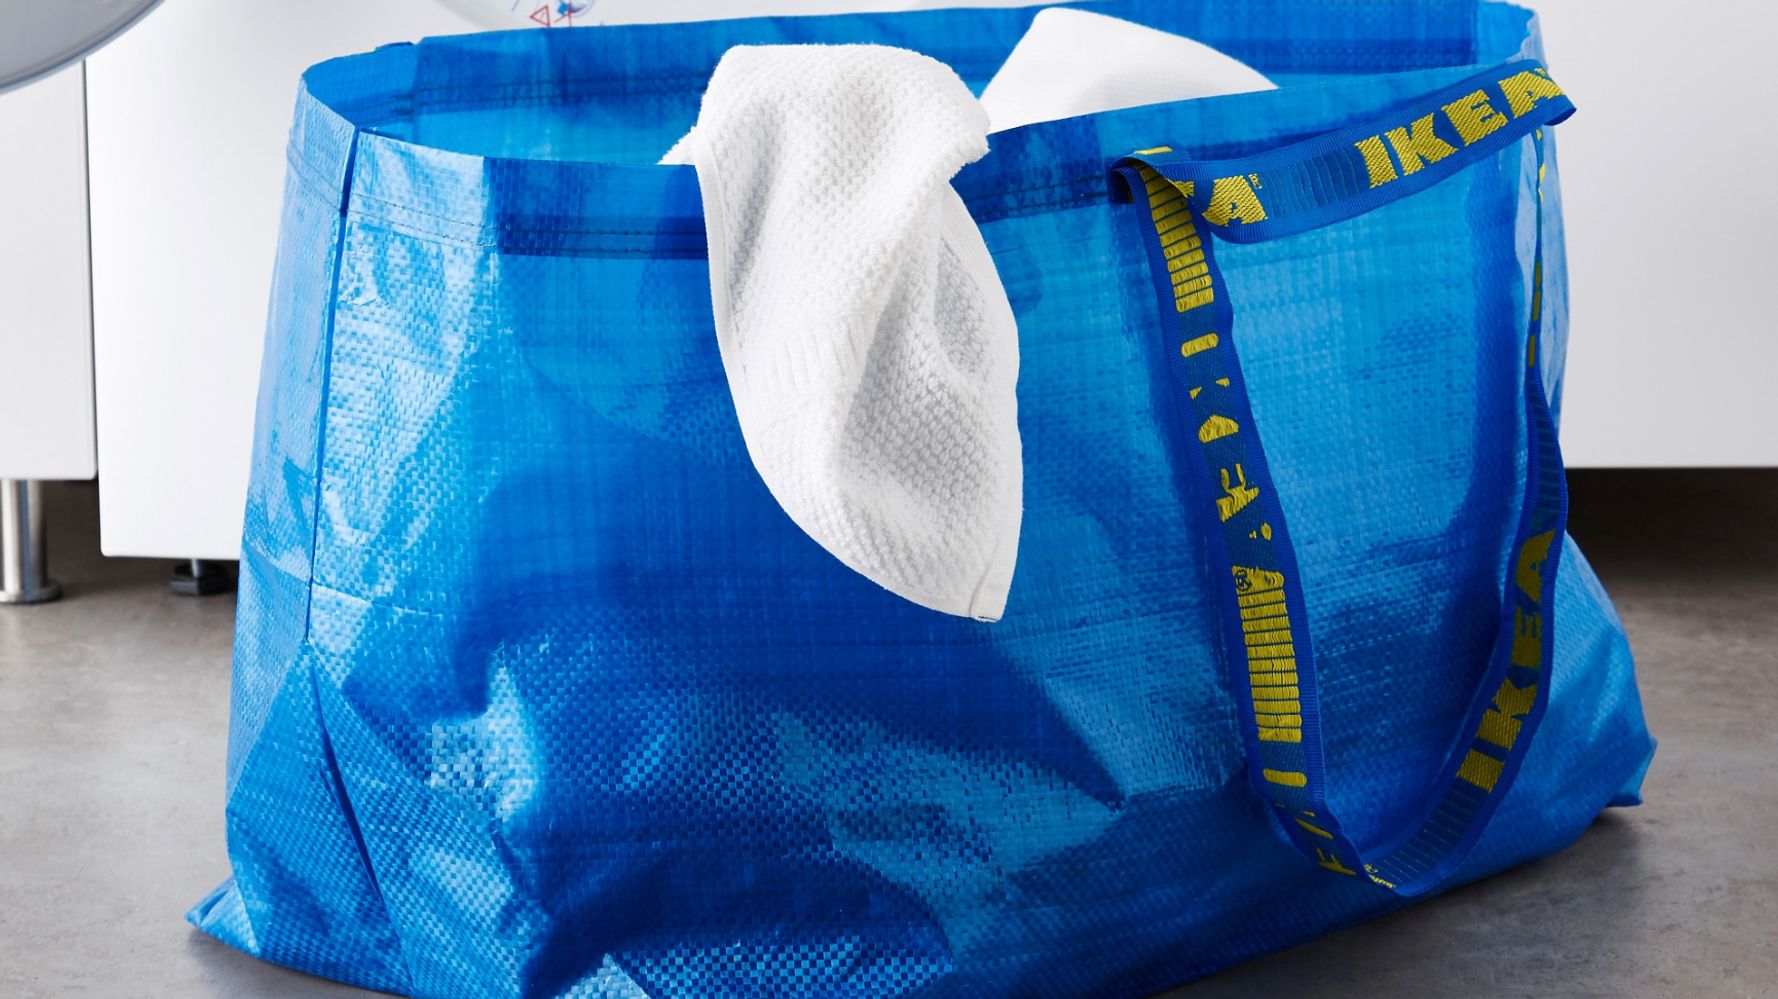 This Bride's Ikea Shopping Bag Hack Can Help You Pee In A Wedding Dress